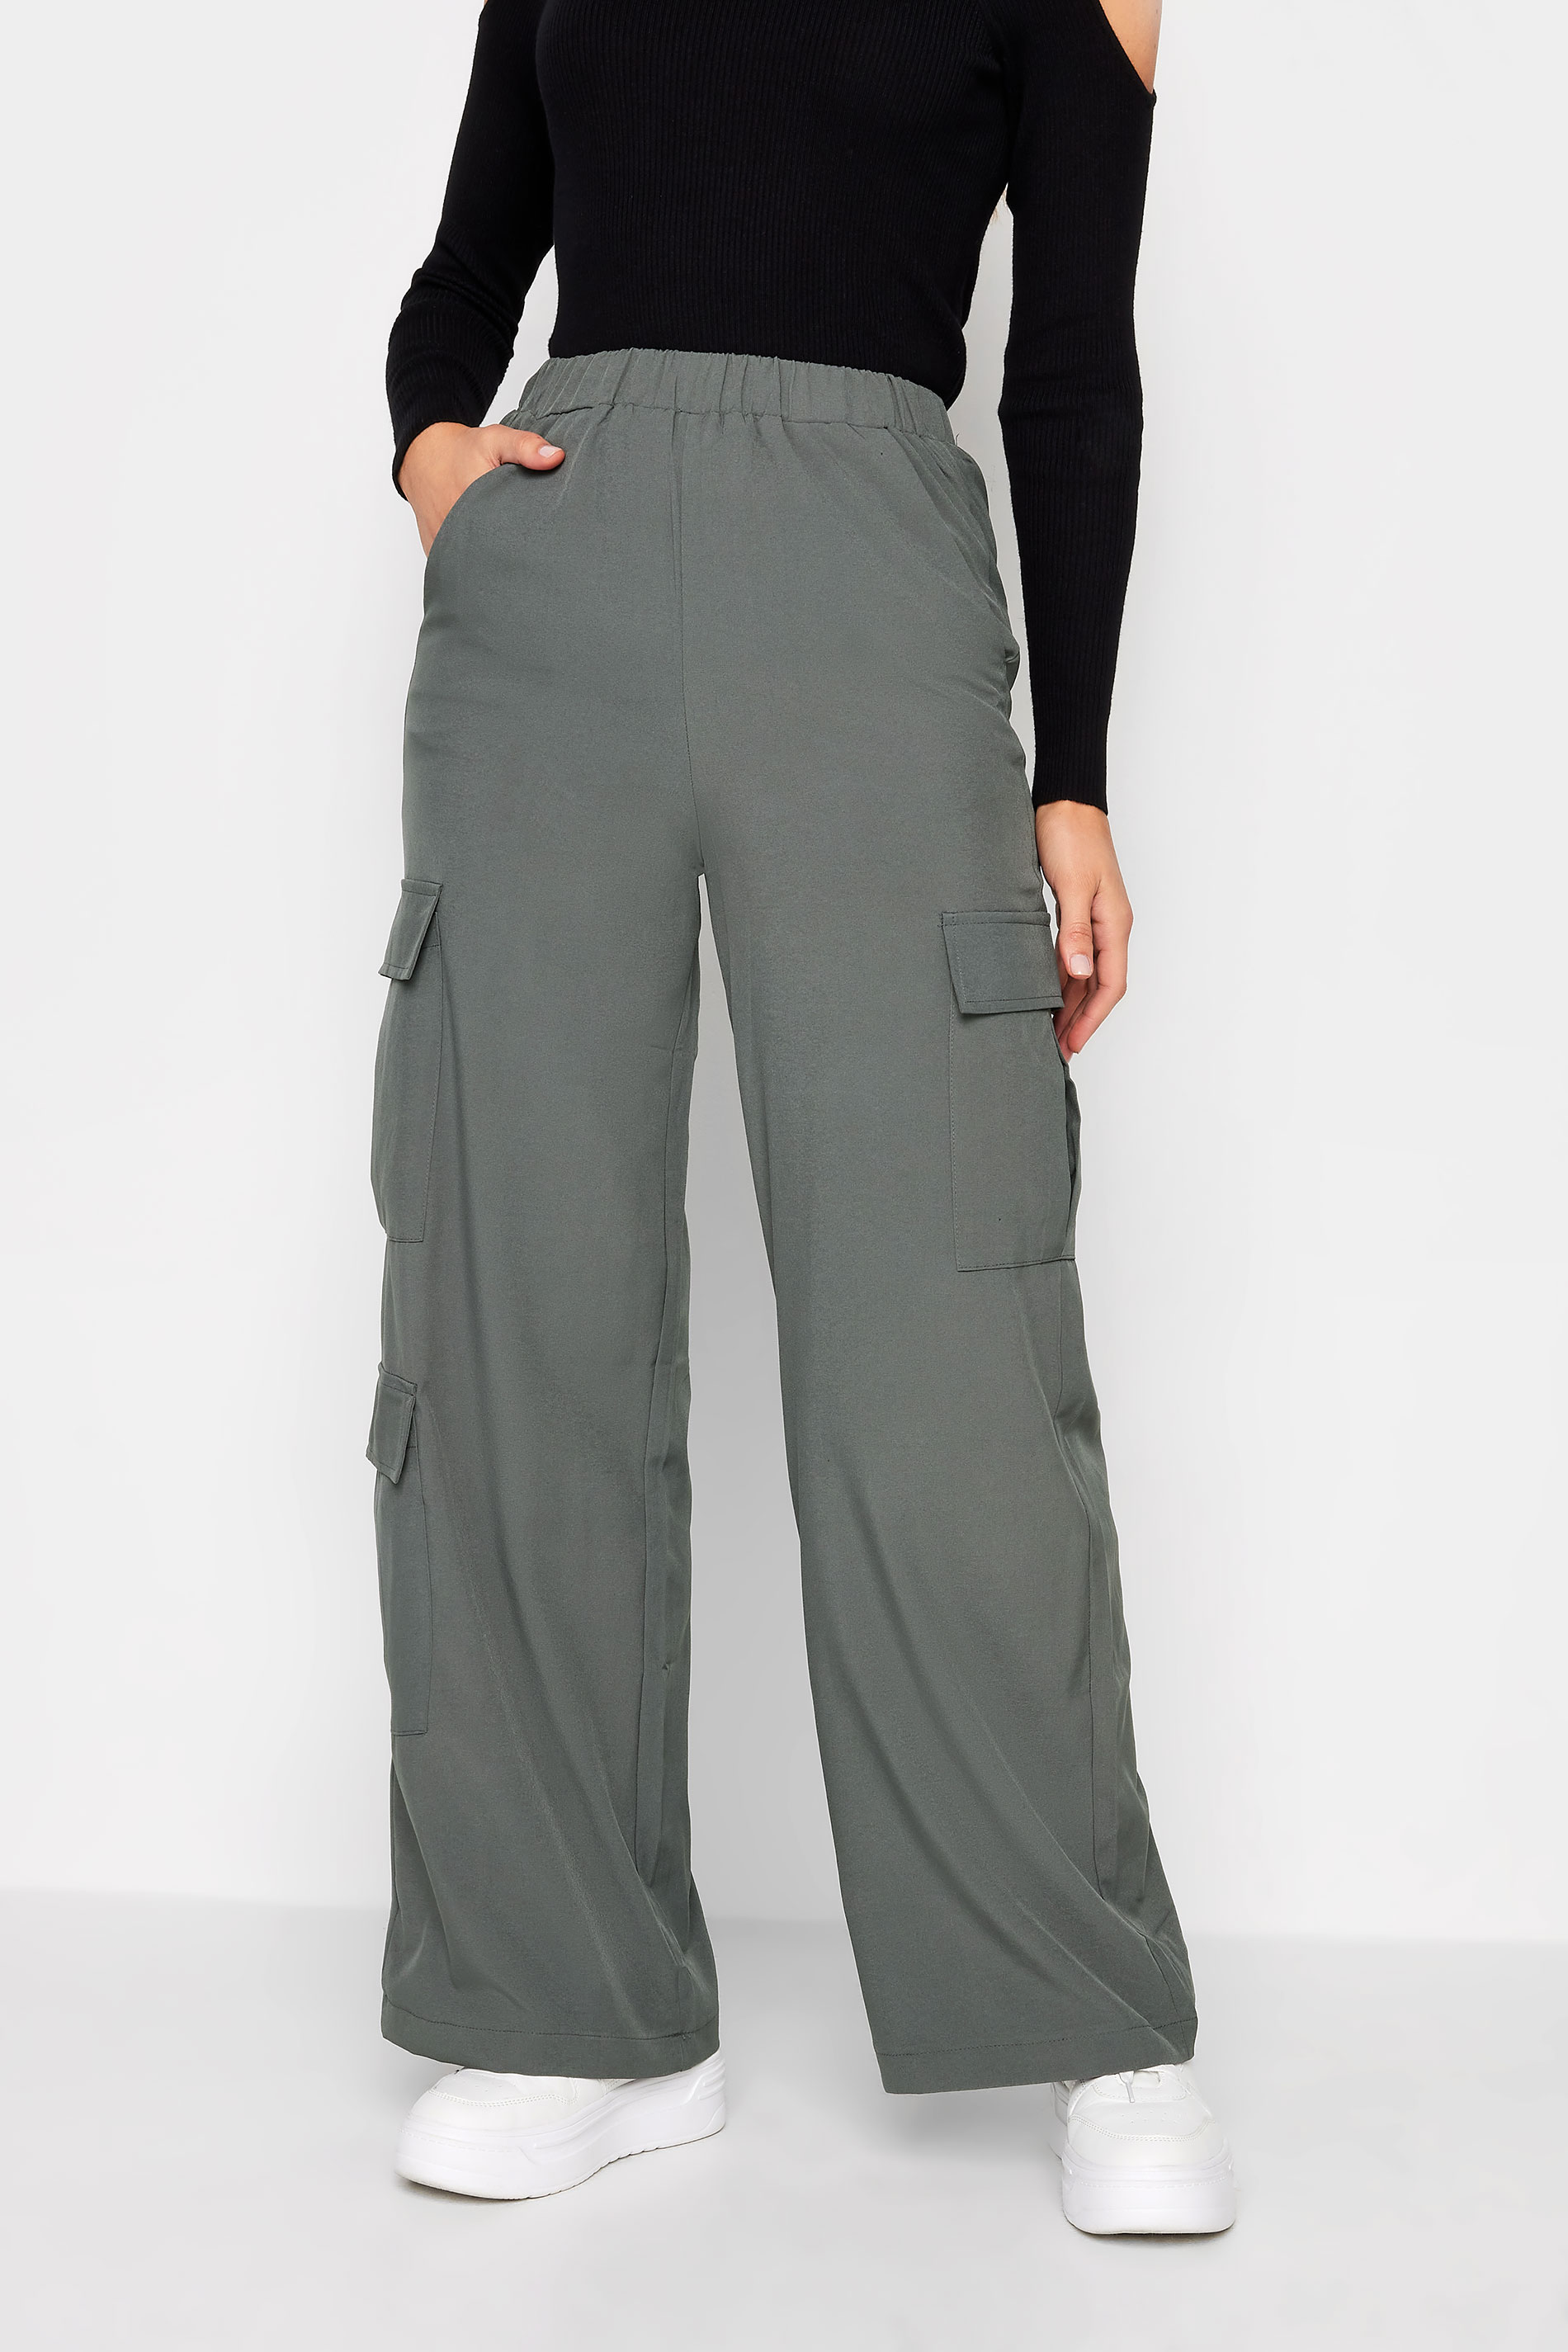 Tall Relaxed Fit Colour Block Tonal Branded Cargo Trouser | Cargo trousers,  Mens tall pants, Mens dress pants